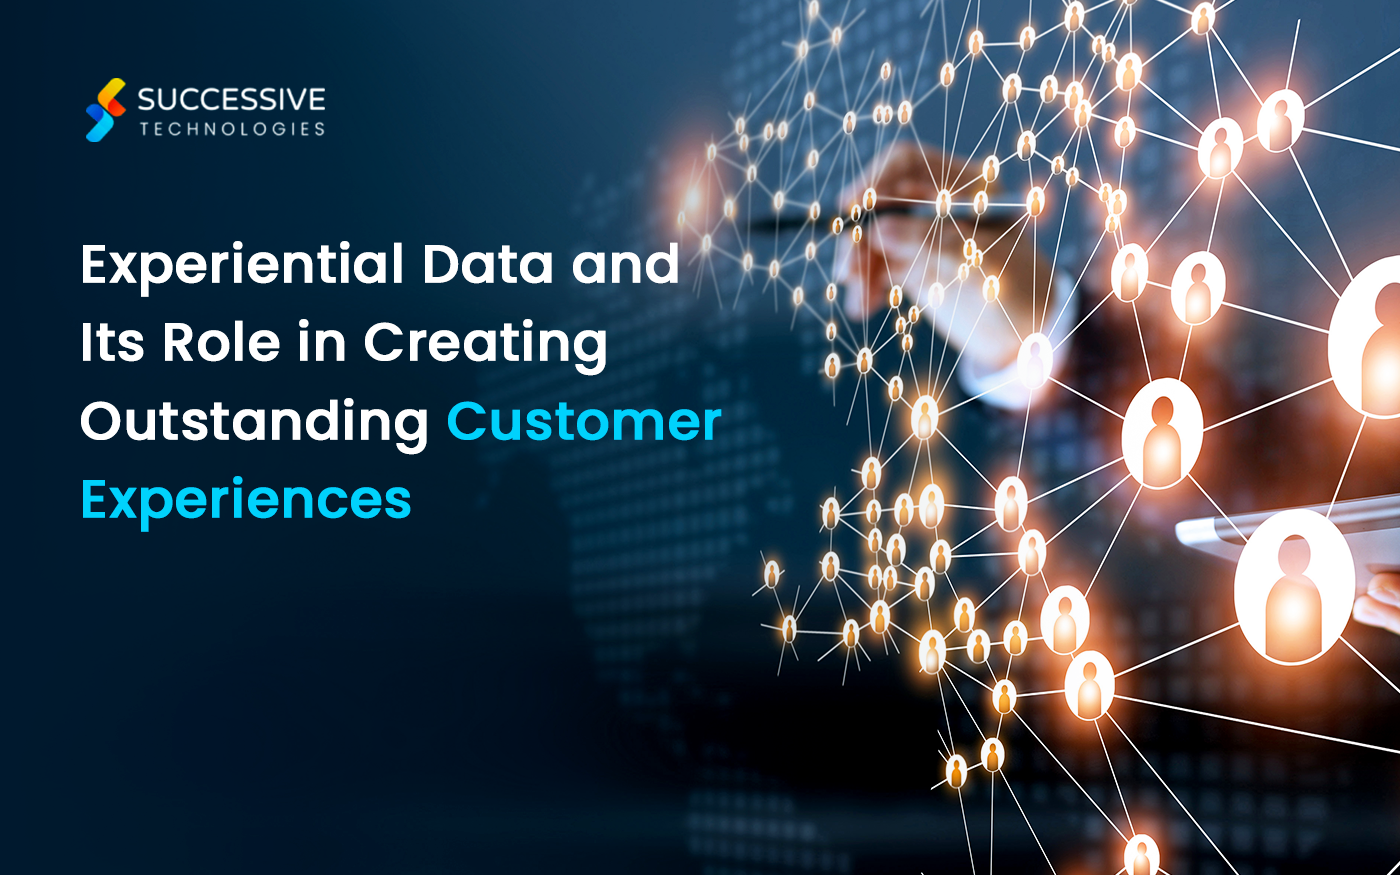 How Experiential Data Can Help Create an Outstanding Customer Experience (CX)